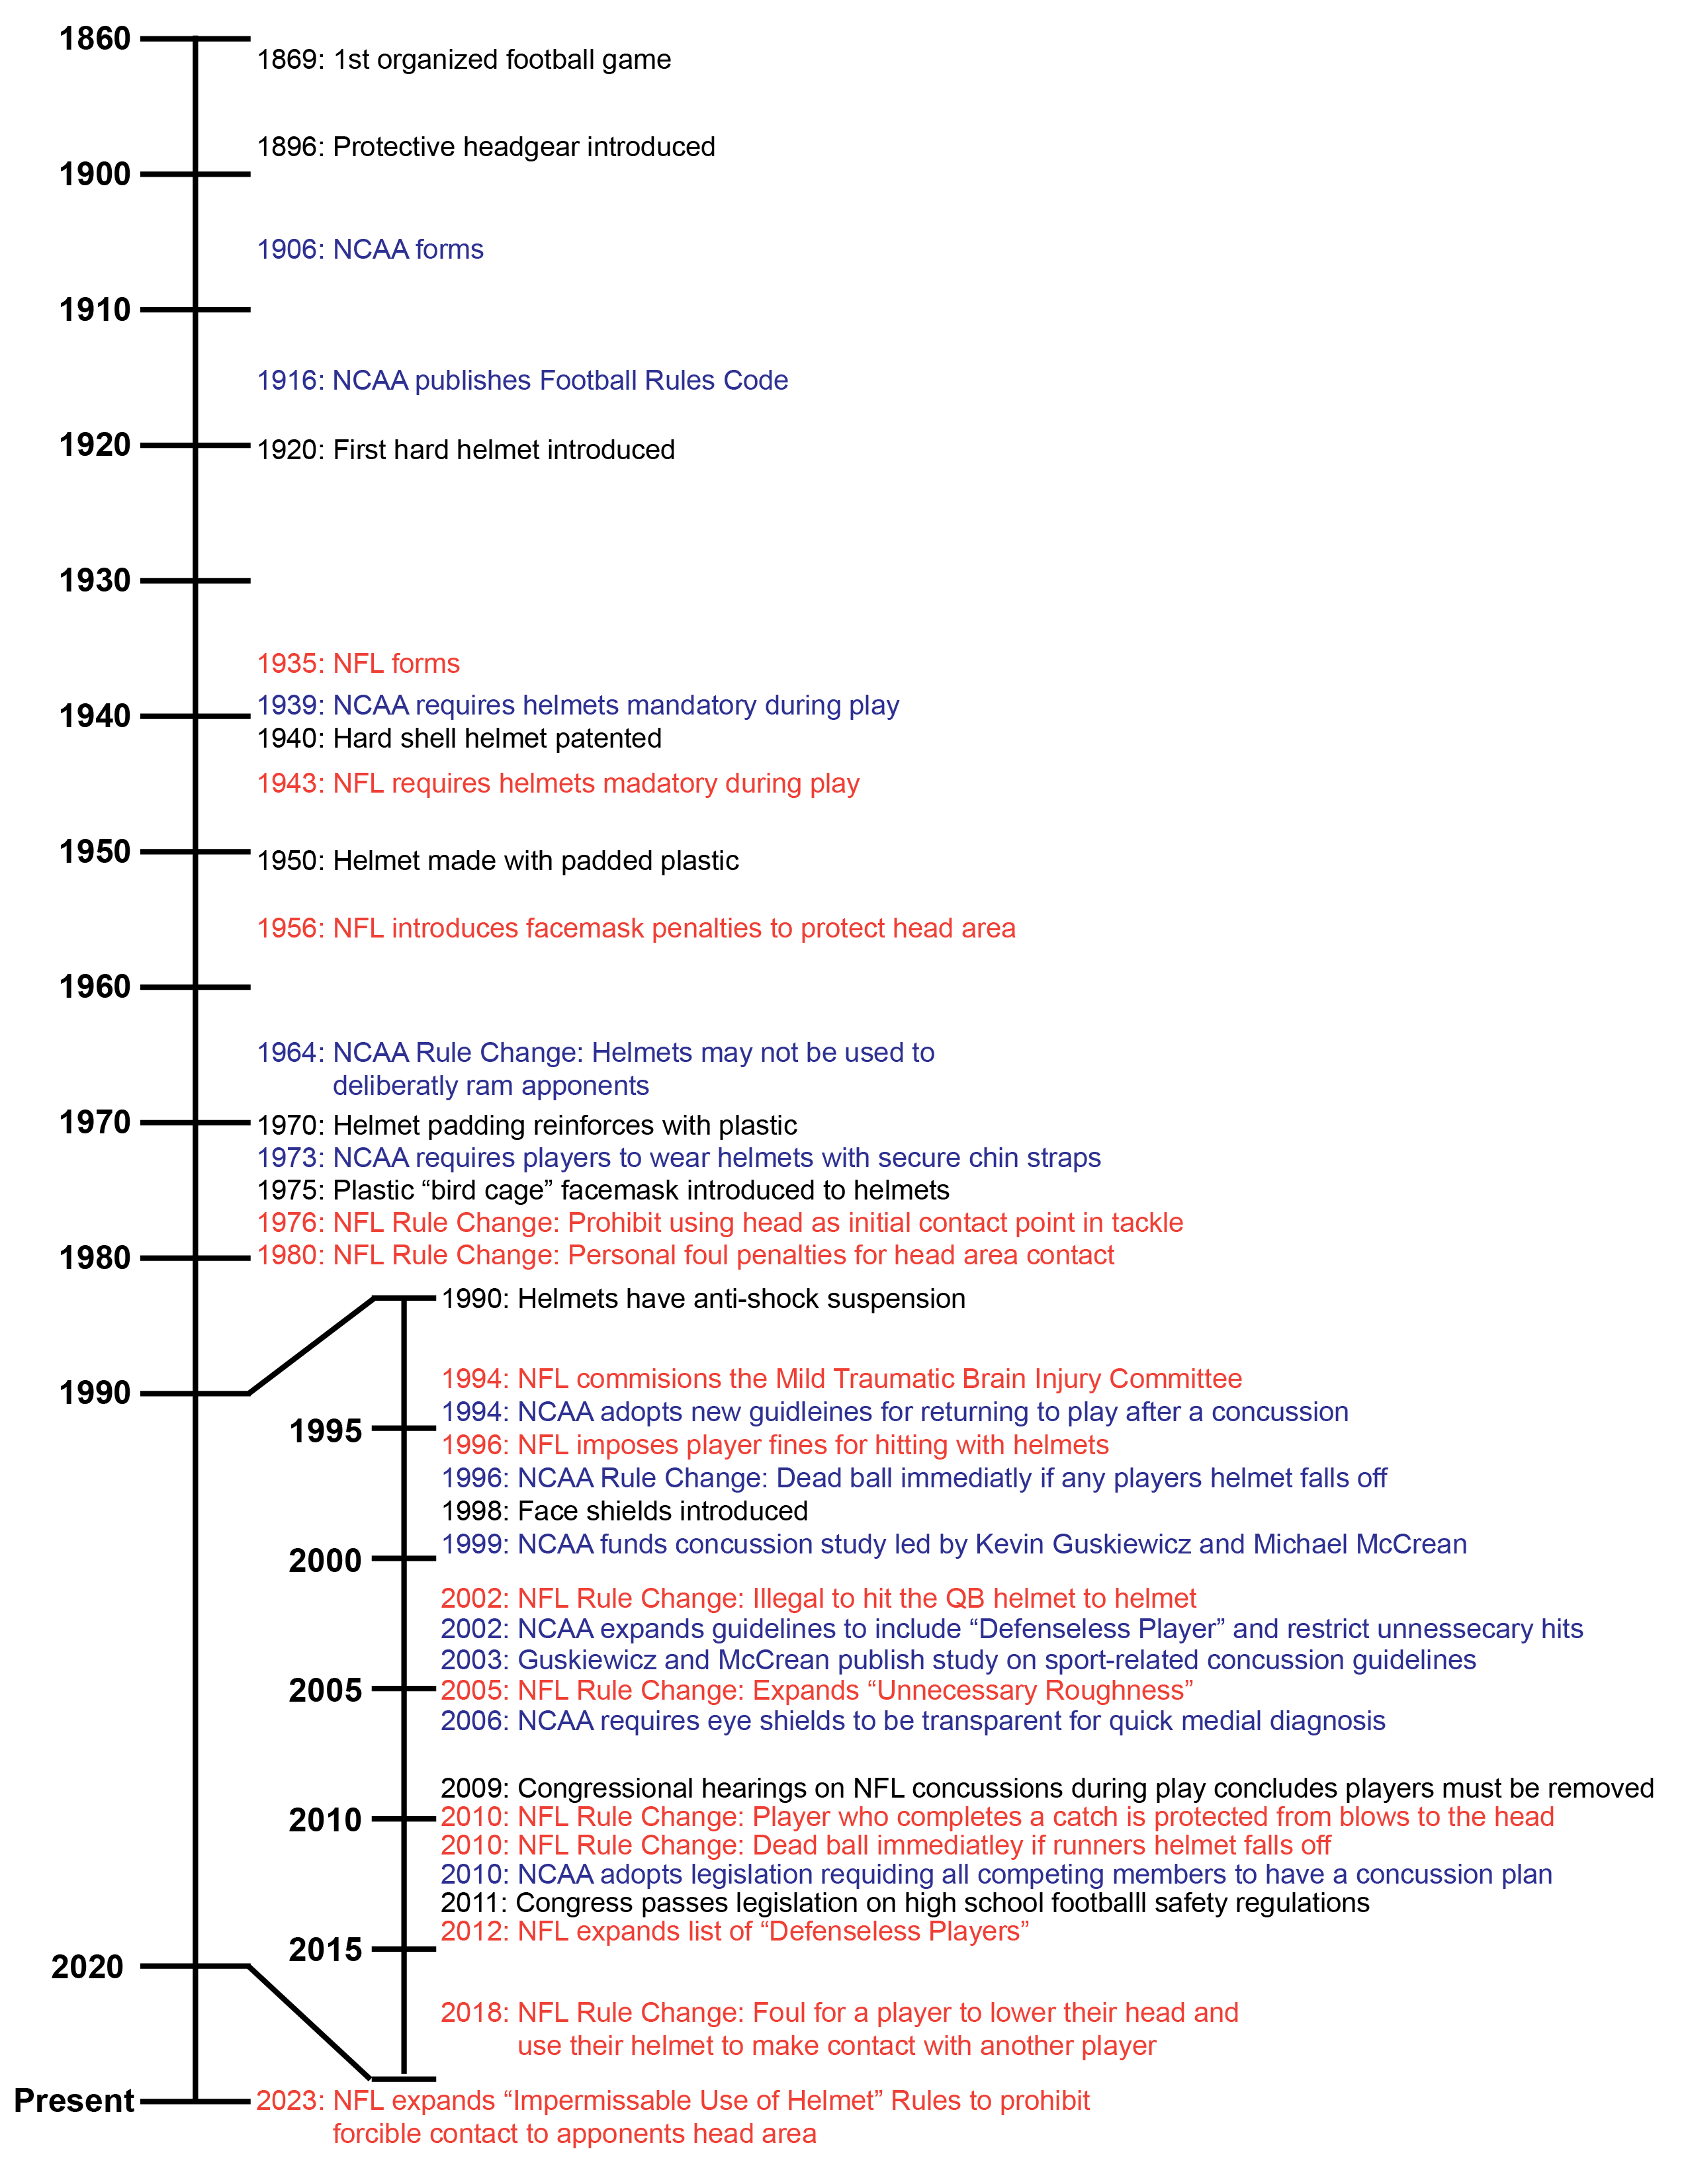 Timeline of helmet introduction in the US.